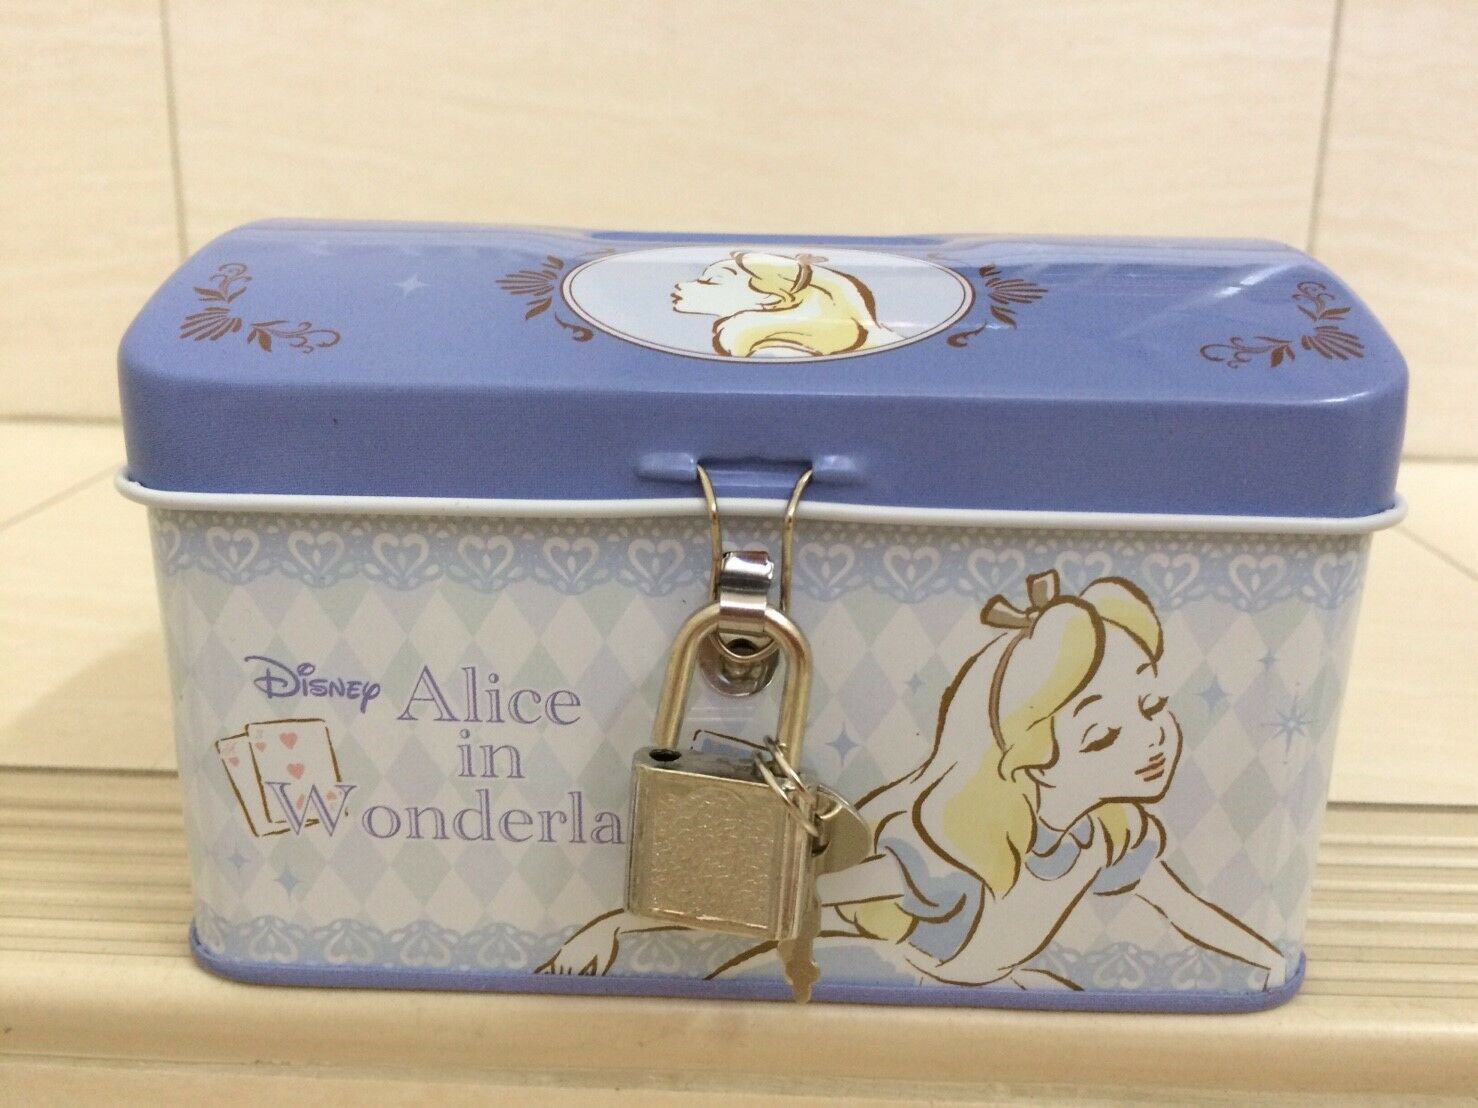 Disney Alice in Wonderland Can Bank Box With Lock. Beautiful and RARE NEW - $25.00